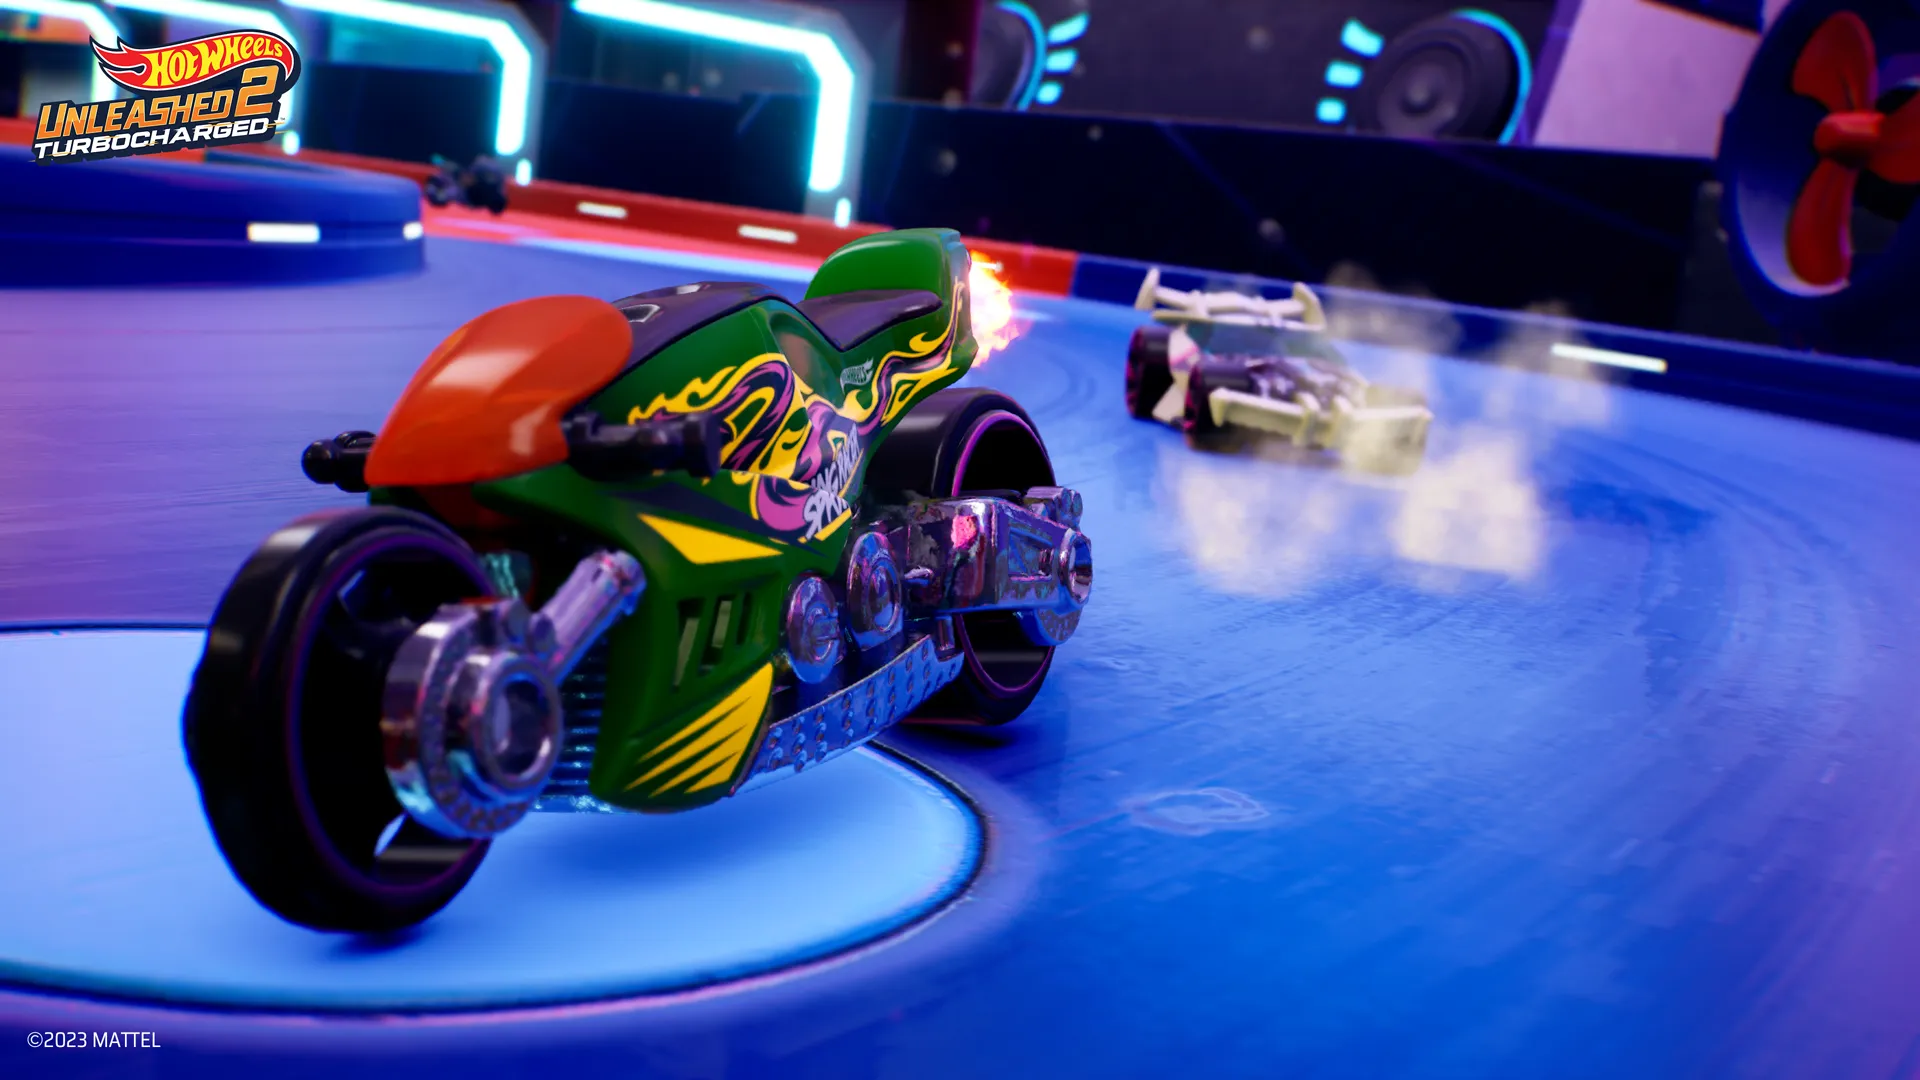 Hot Wheels Unleashed 2 Turbocharged Gameplay Trailer And Screenshots